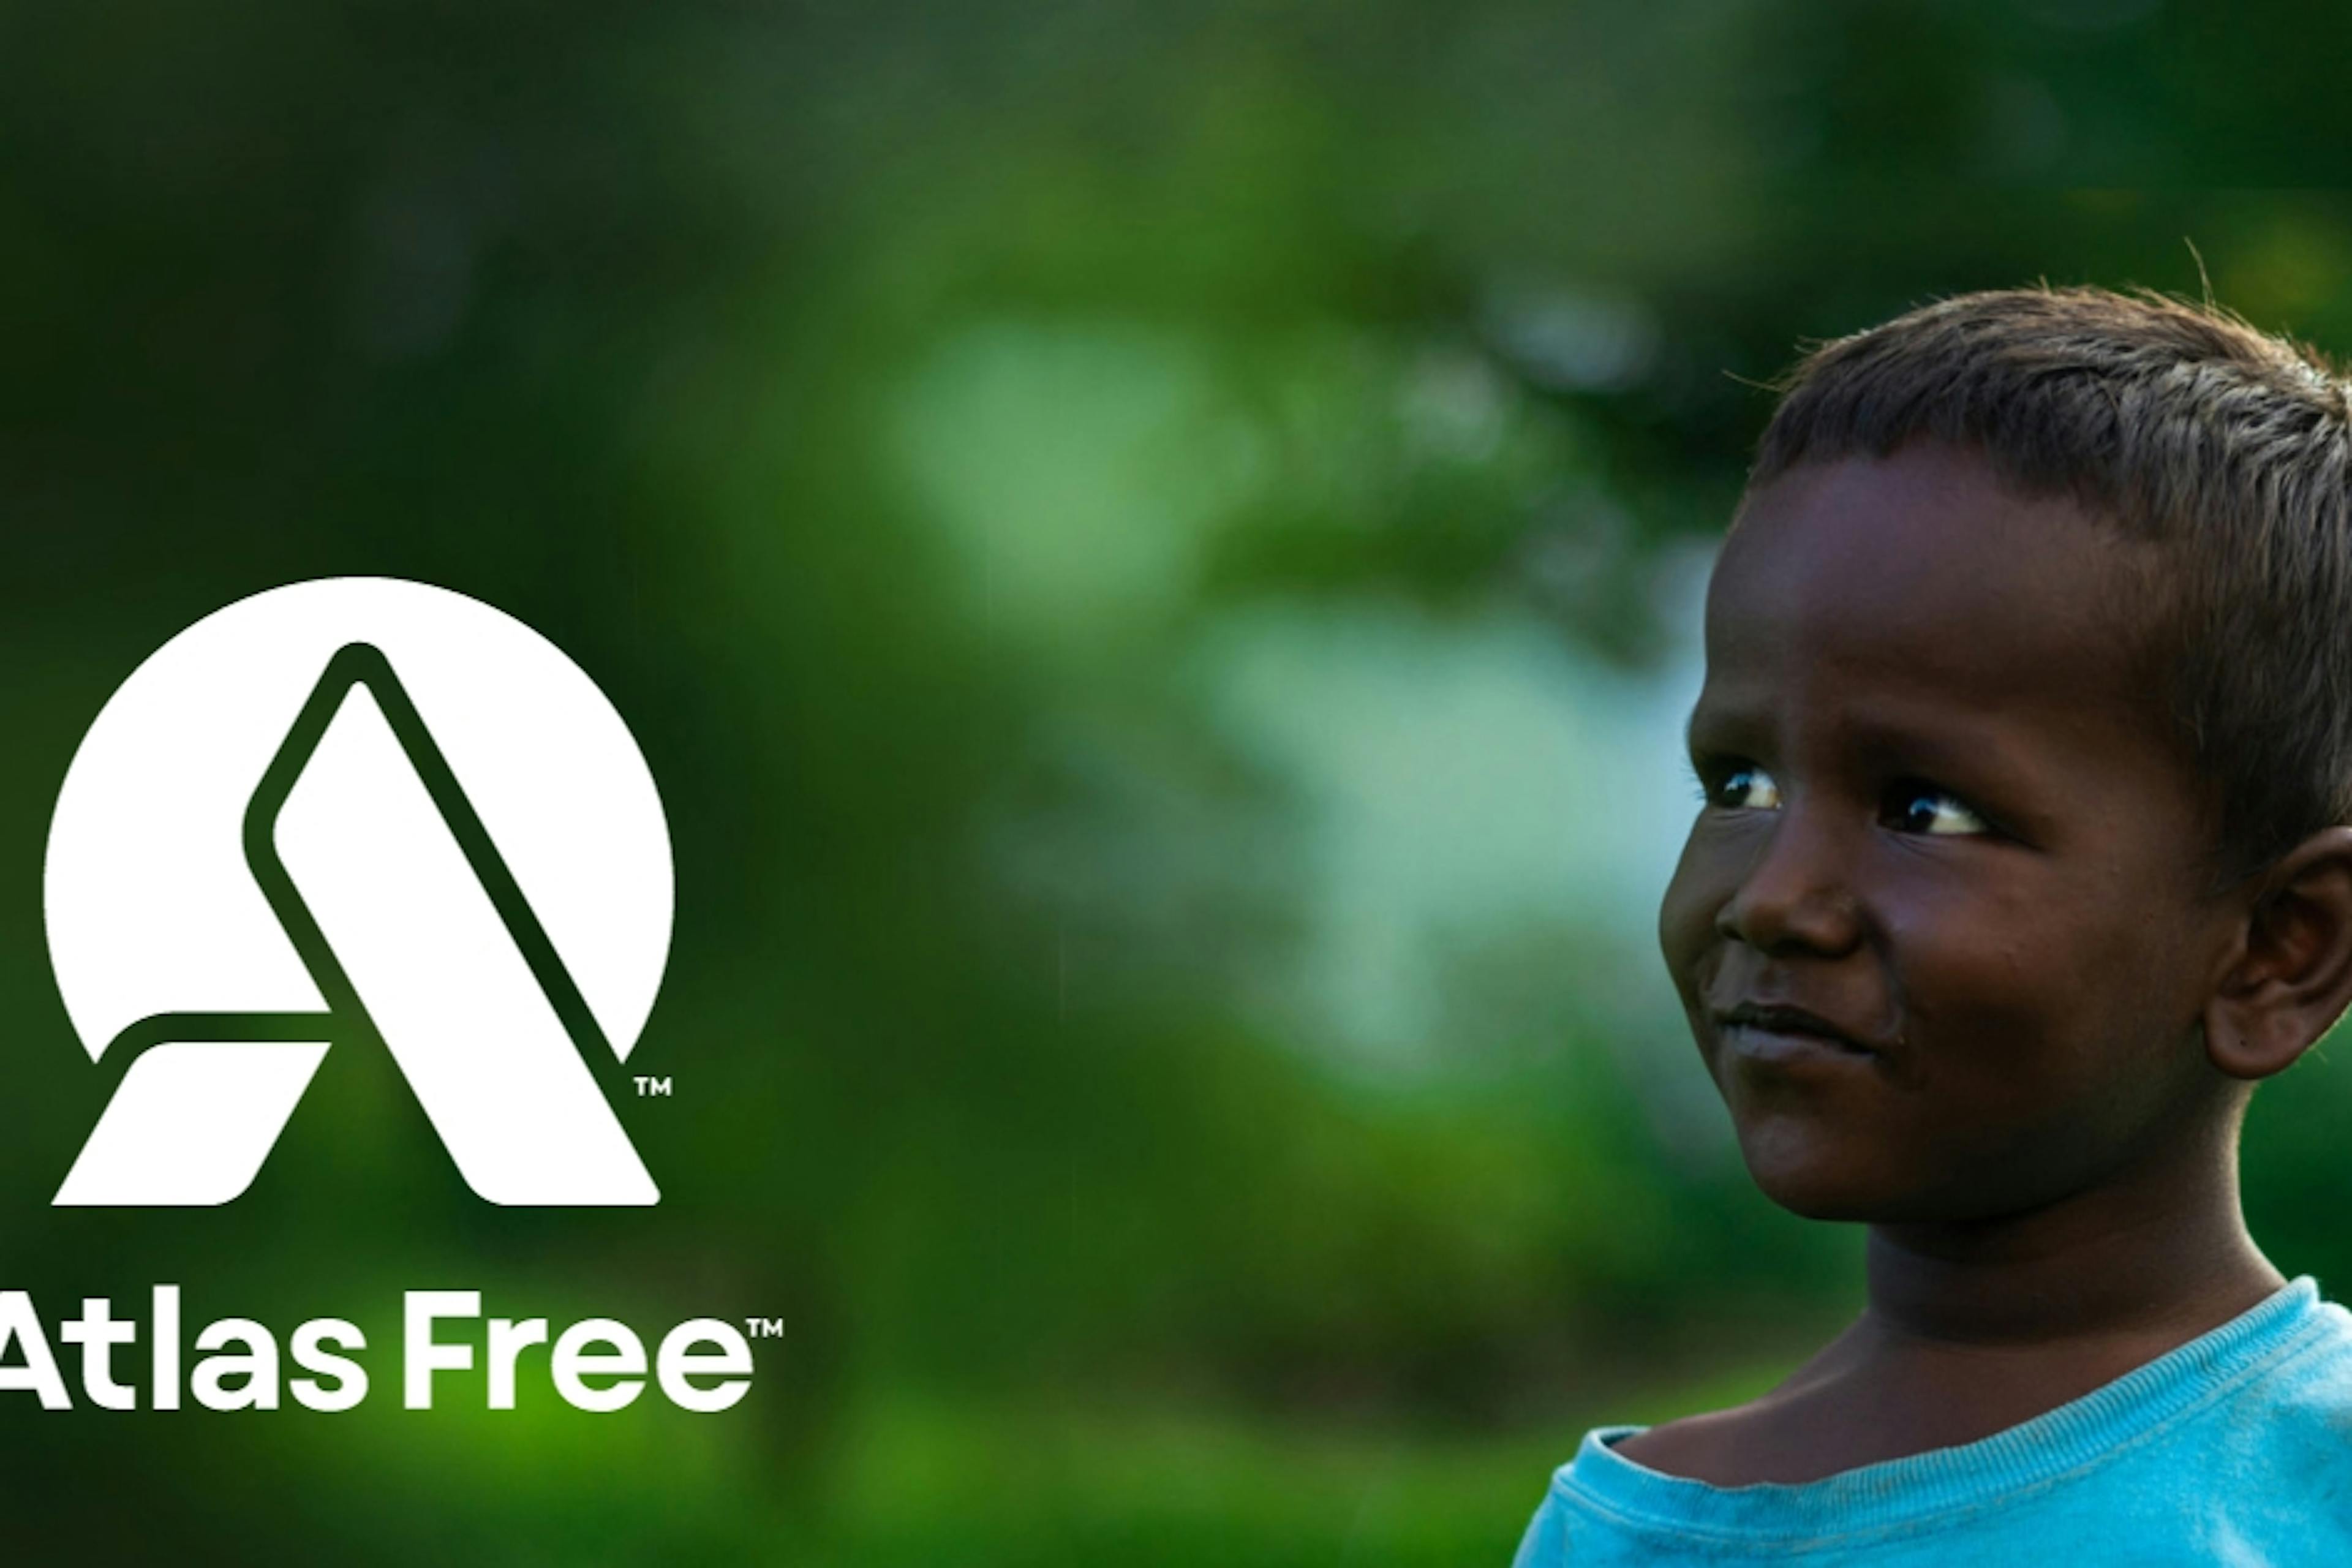 A young child is looking towards the Atlas Free Logo with blurry green trees in the background.